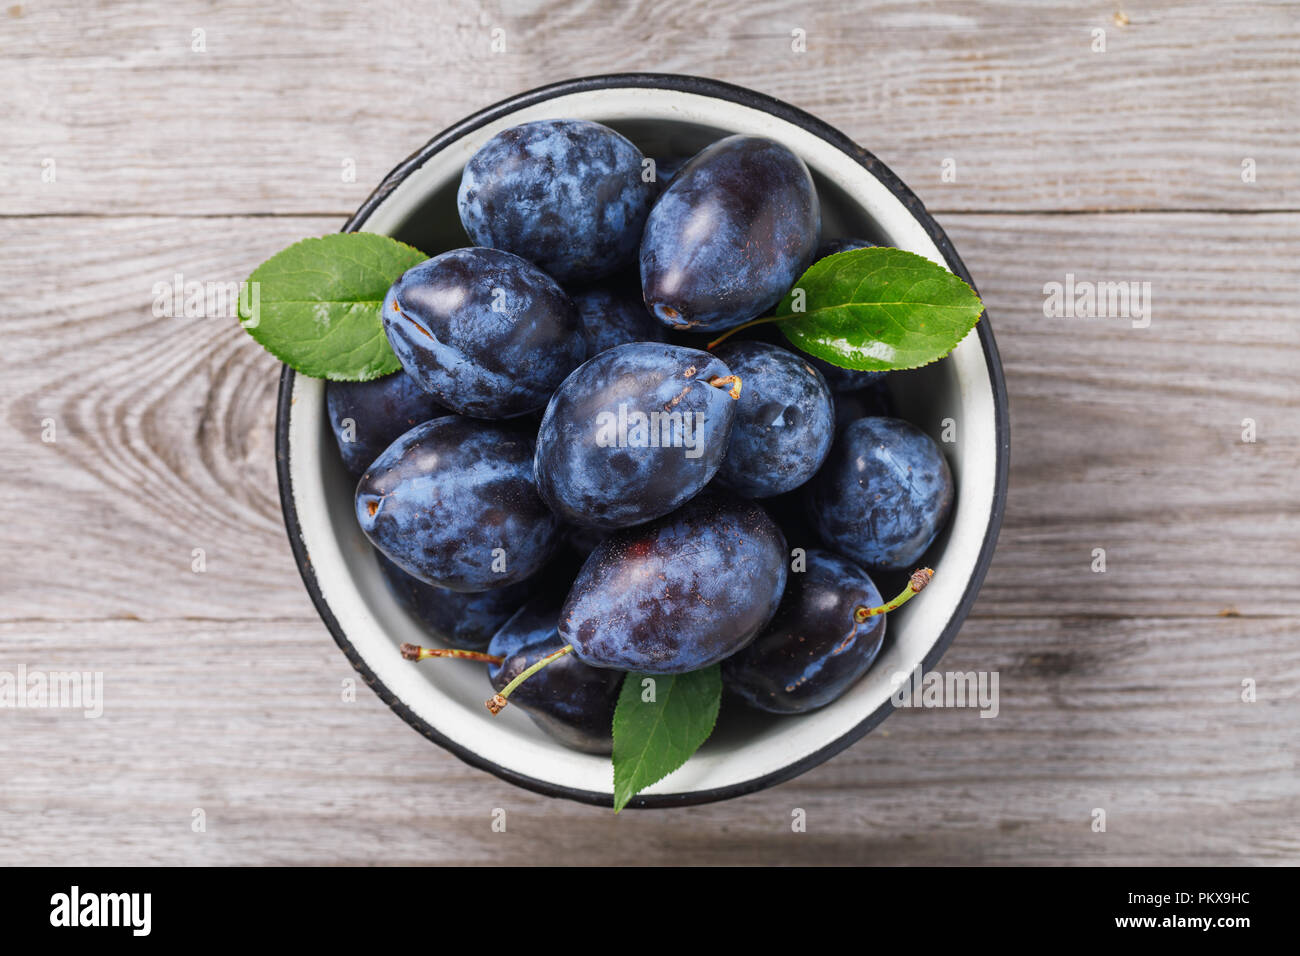 Top view of a bowl full of ripe prune fruit on a wooden table Stock Photo